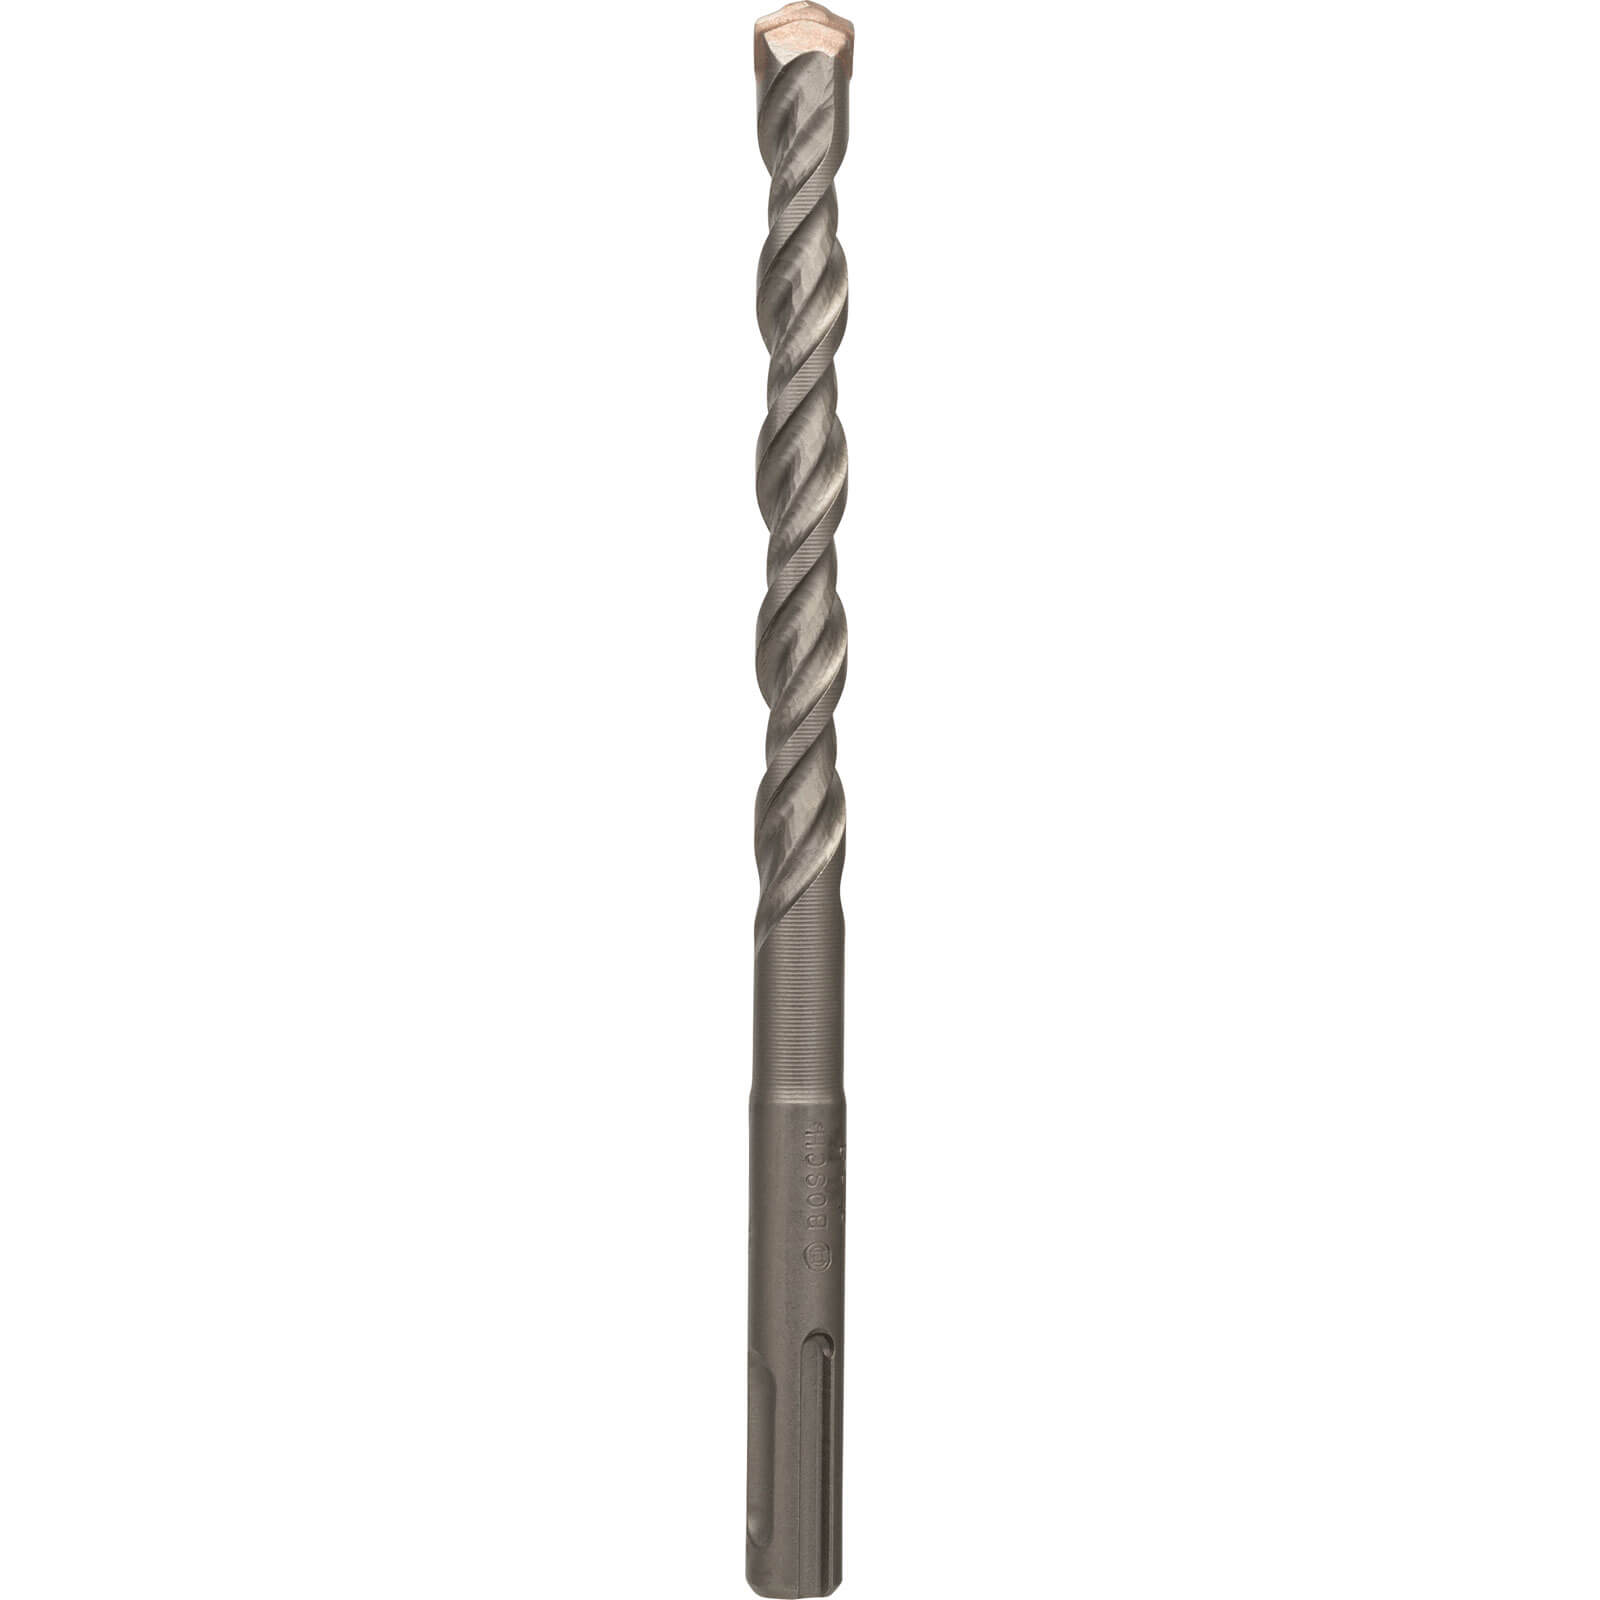 Image of Bosch Series 3 SDS Plus Masonry Drill Bit 10mm 160mm Pack of 10